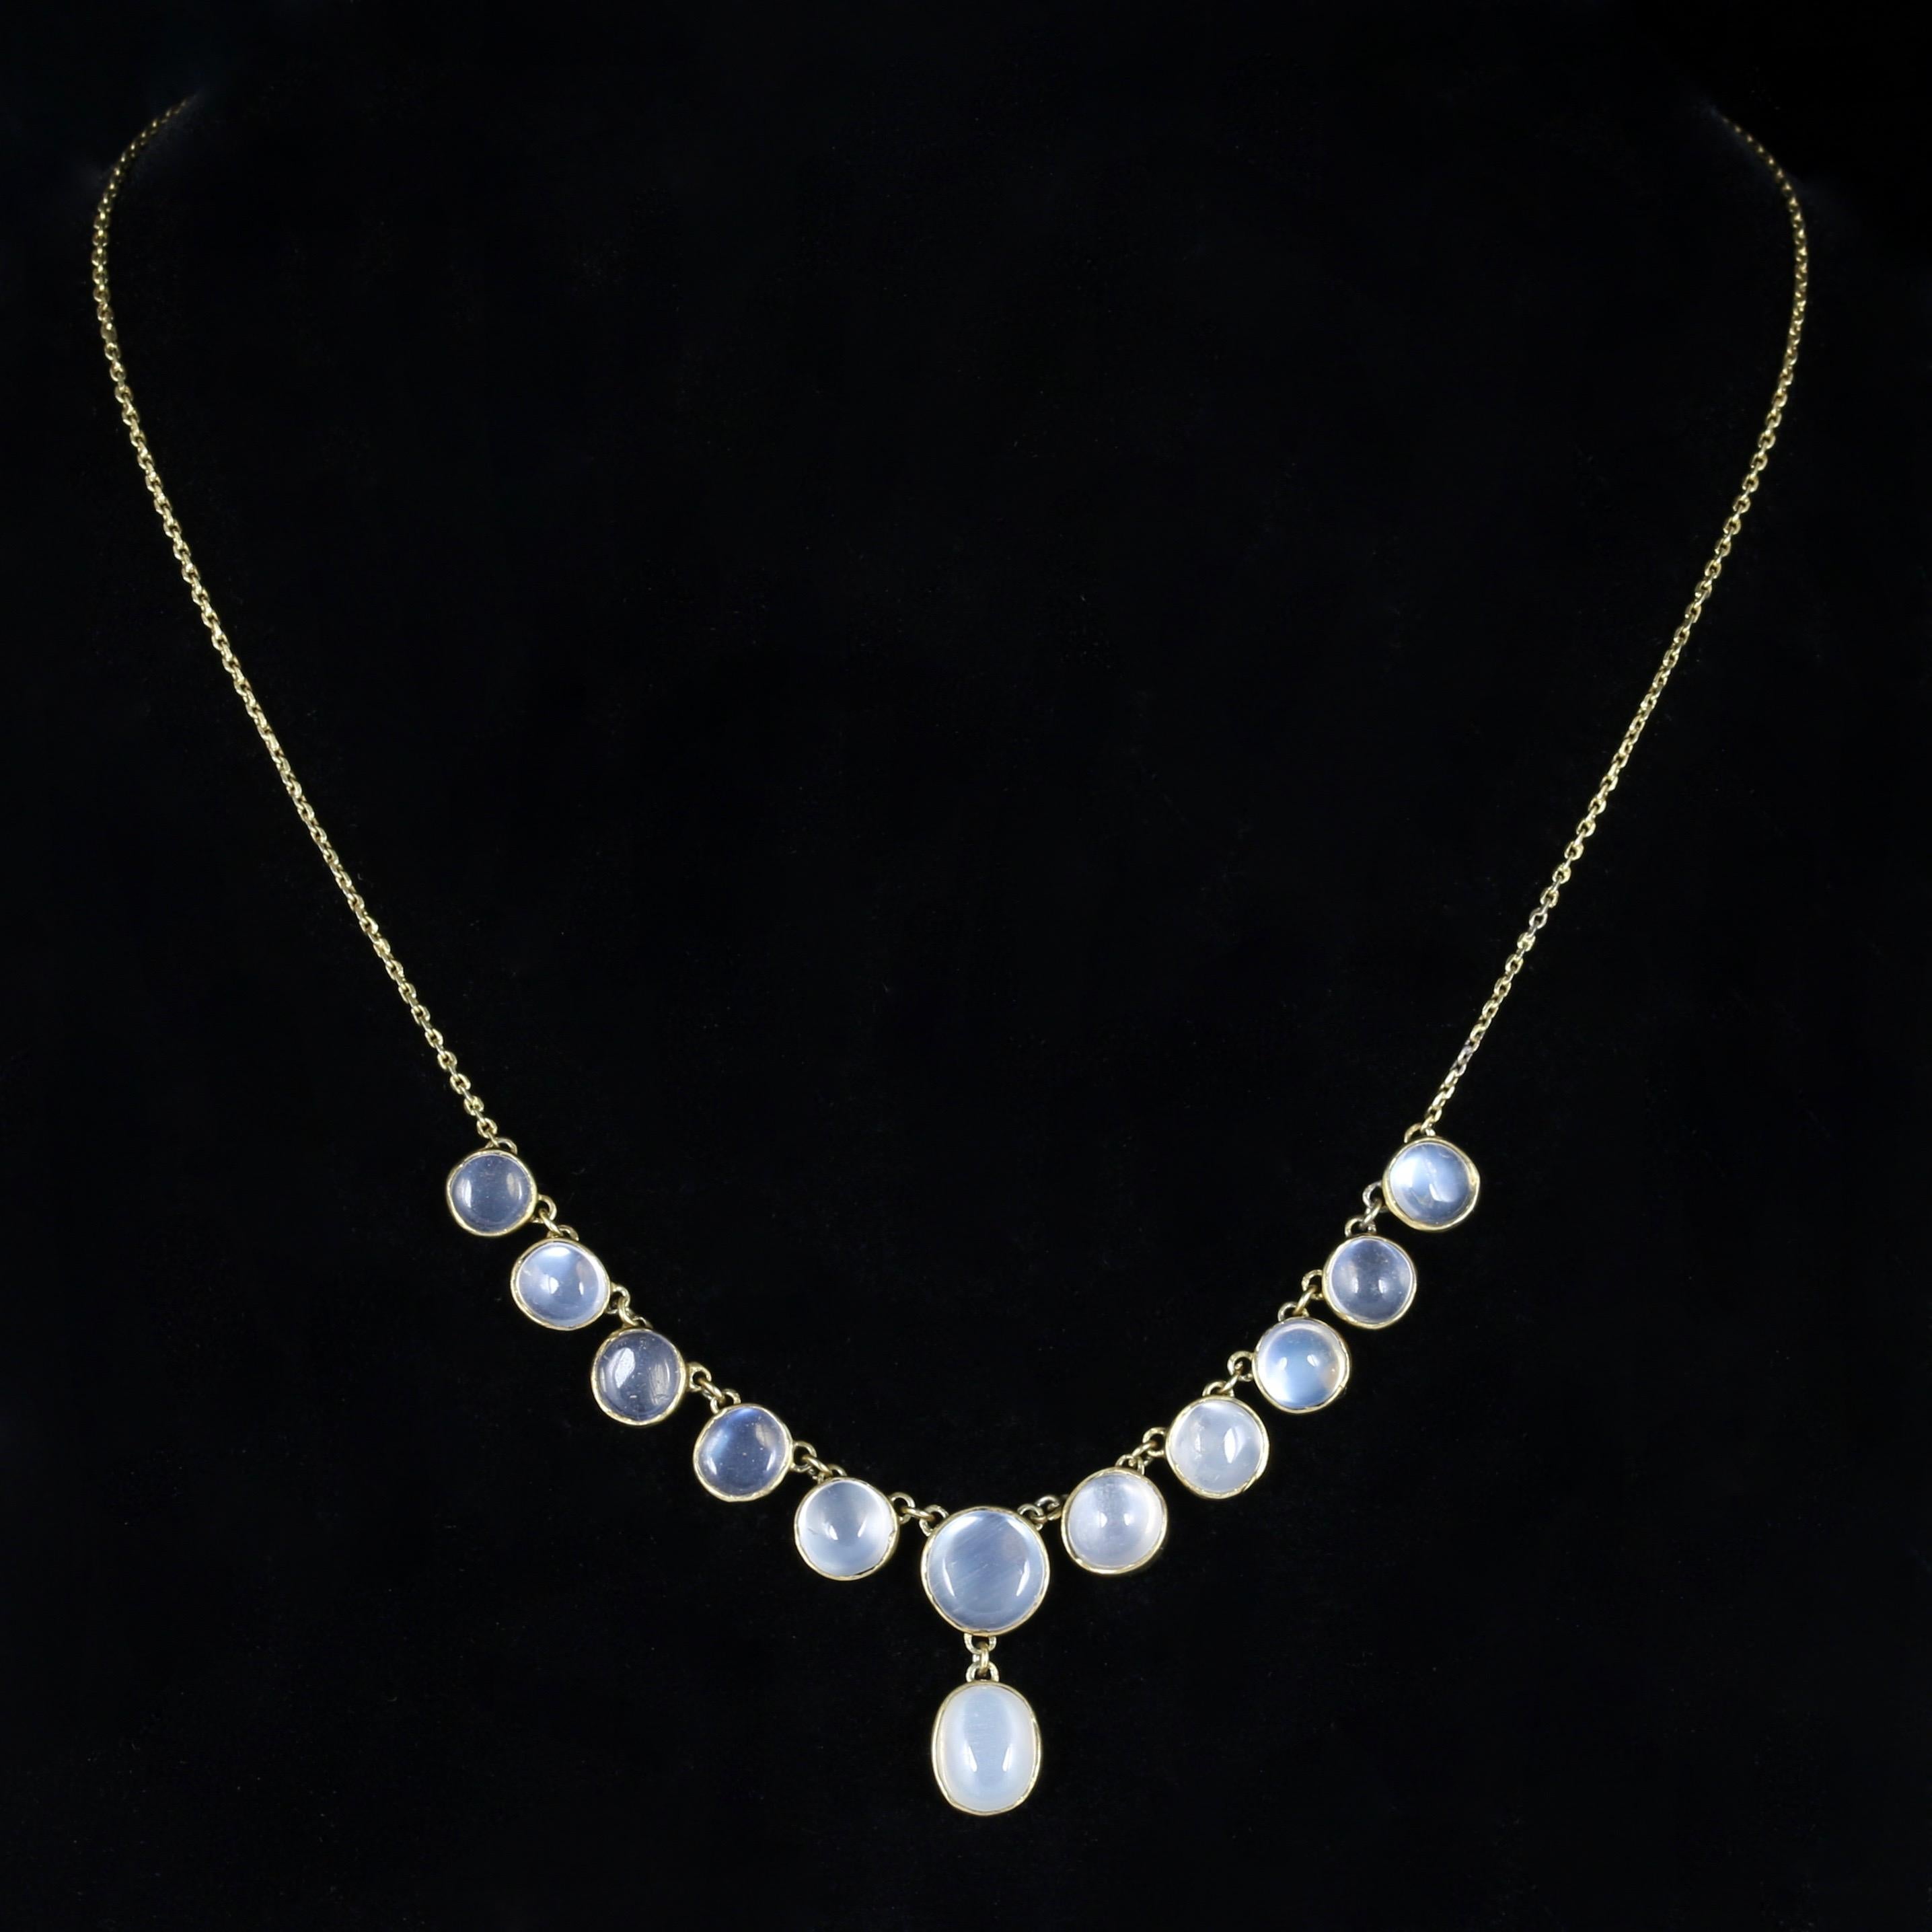 For more details please click continue reading down below...

This lovely necklace is set with beautiful glowing Moonstones which have a ghostly hue and an excellent blue schiller.

A genuine Victorian piece, Circa 1880.

The garland section is set